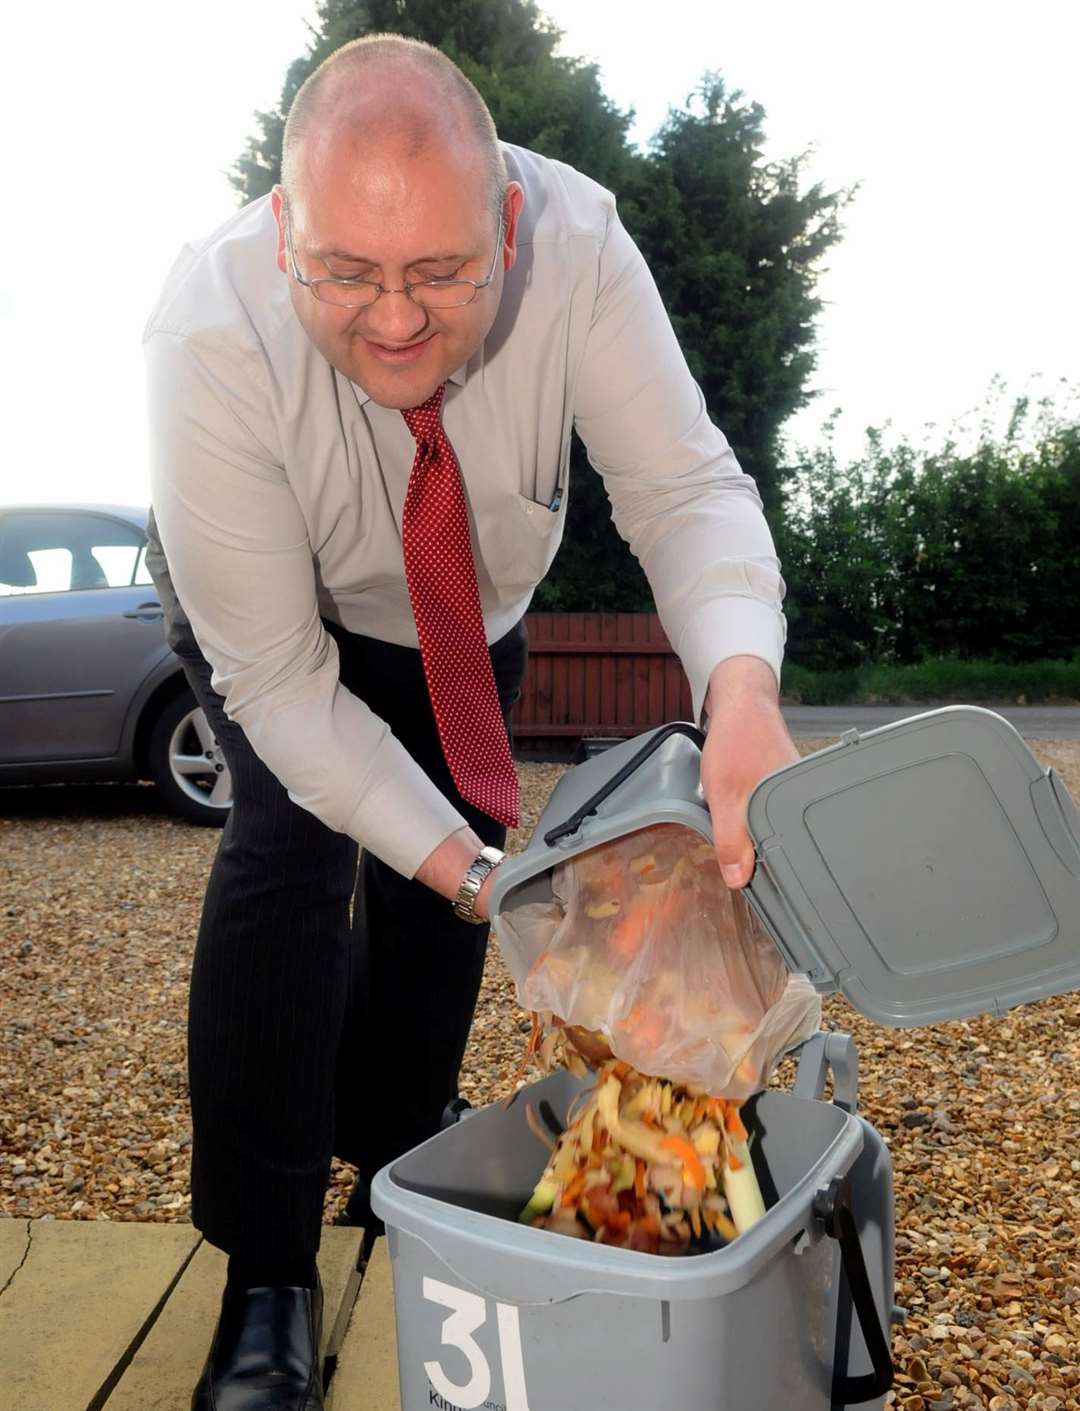 Some say the cutbacks could put food waste collections at risk